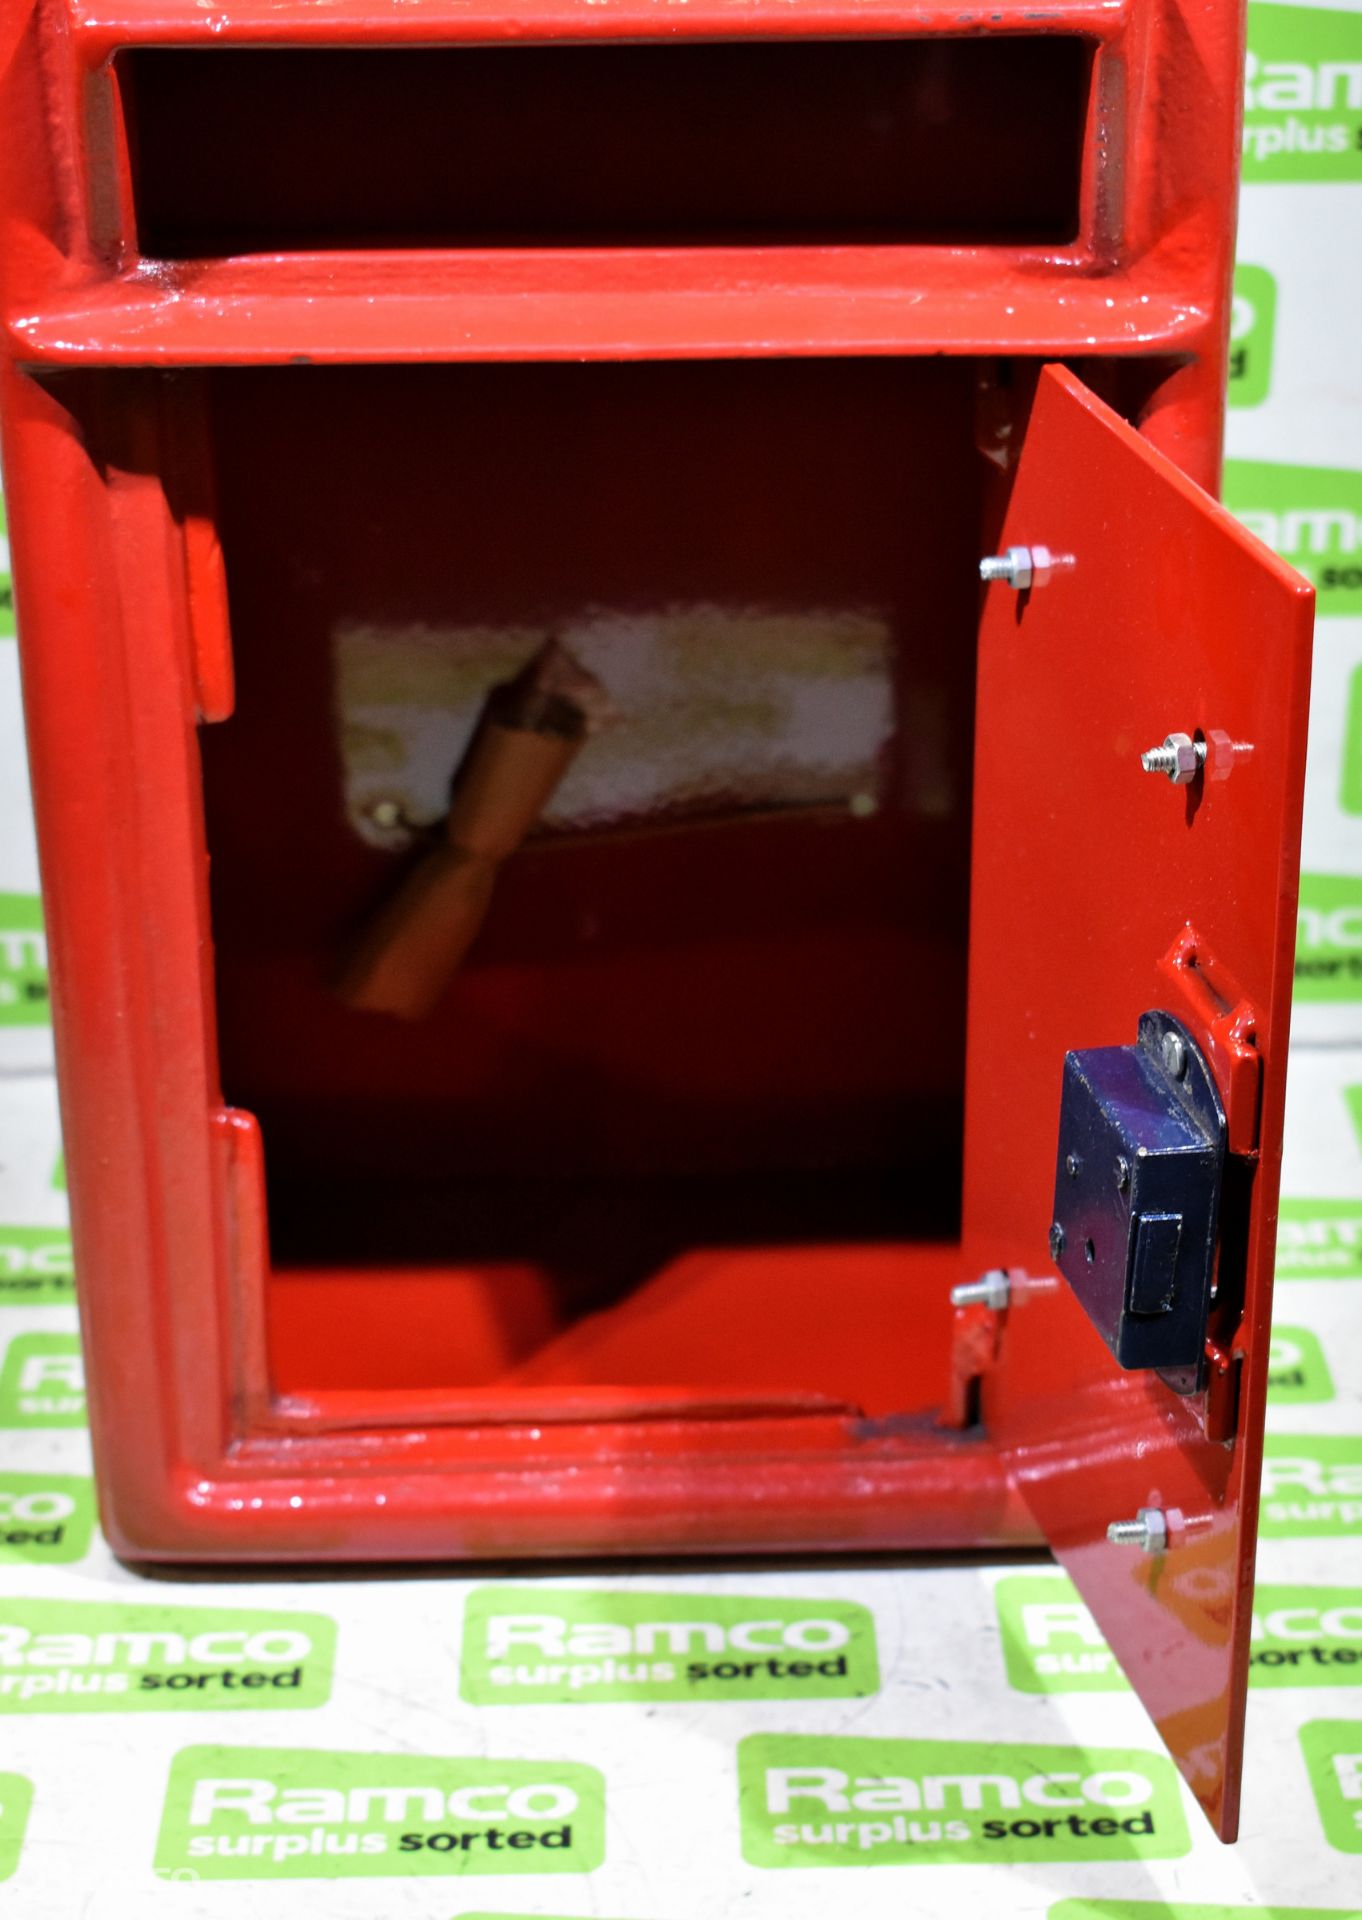 Cast steel red post box - novelty H 40 x W 20 x L 20 cm - Image 2 of 3